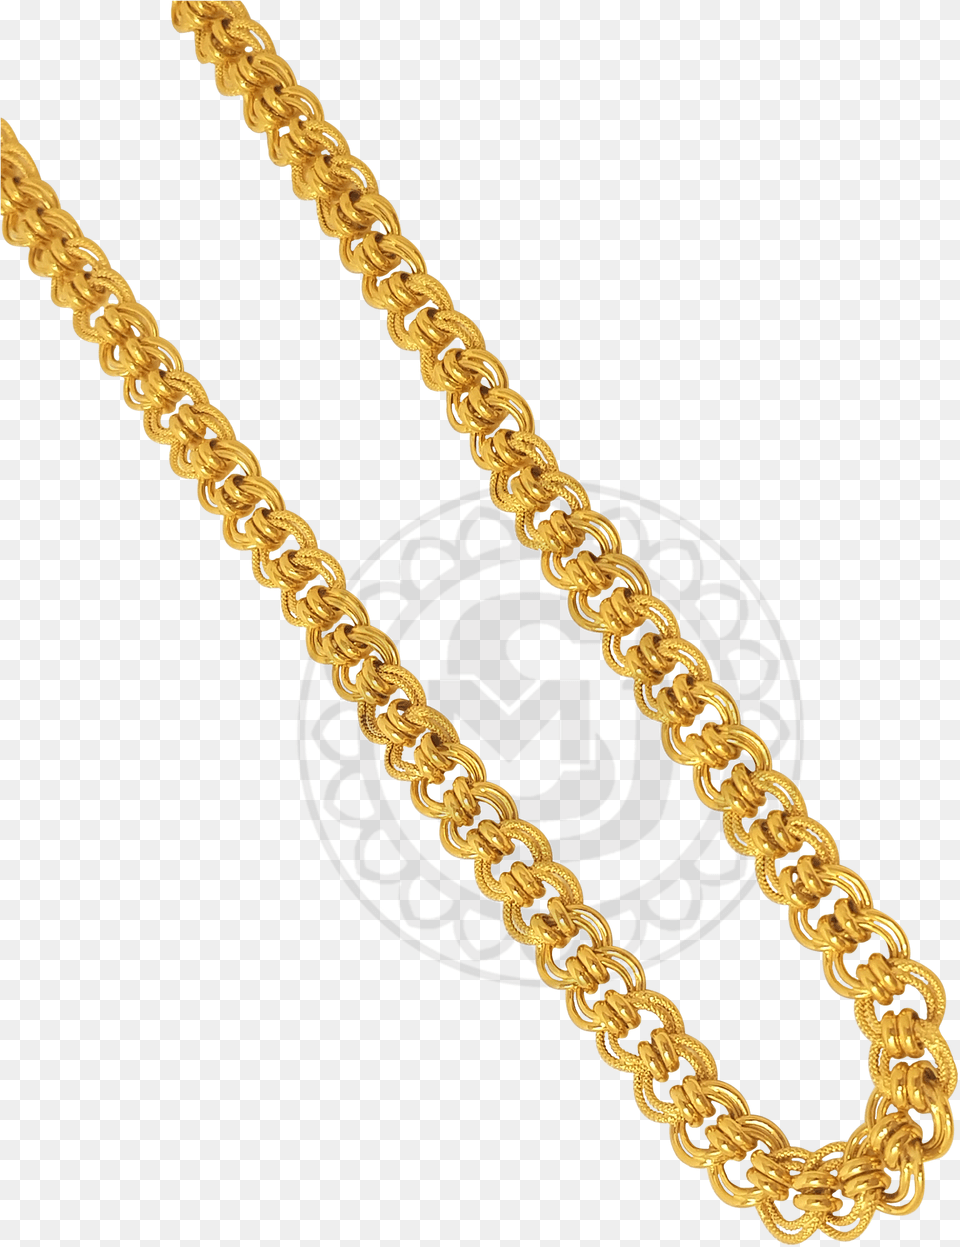 Gold Chains Chain Full Size Download Seekpng Solid, Accessories, Jewelry, Necklace Free Transparent Png